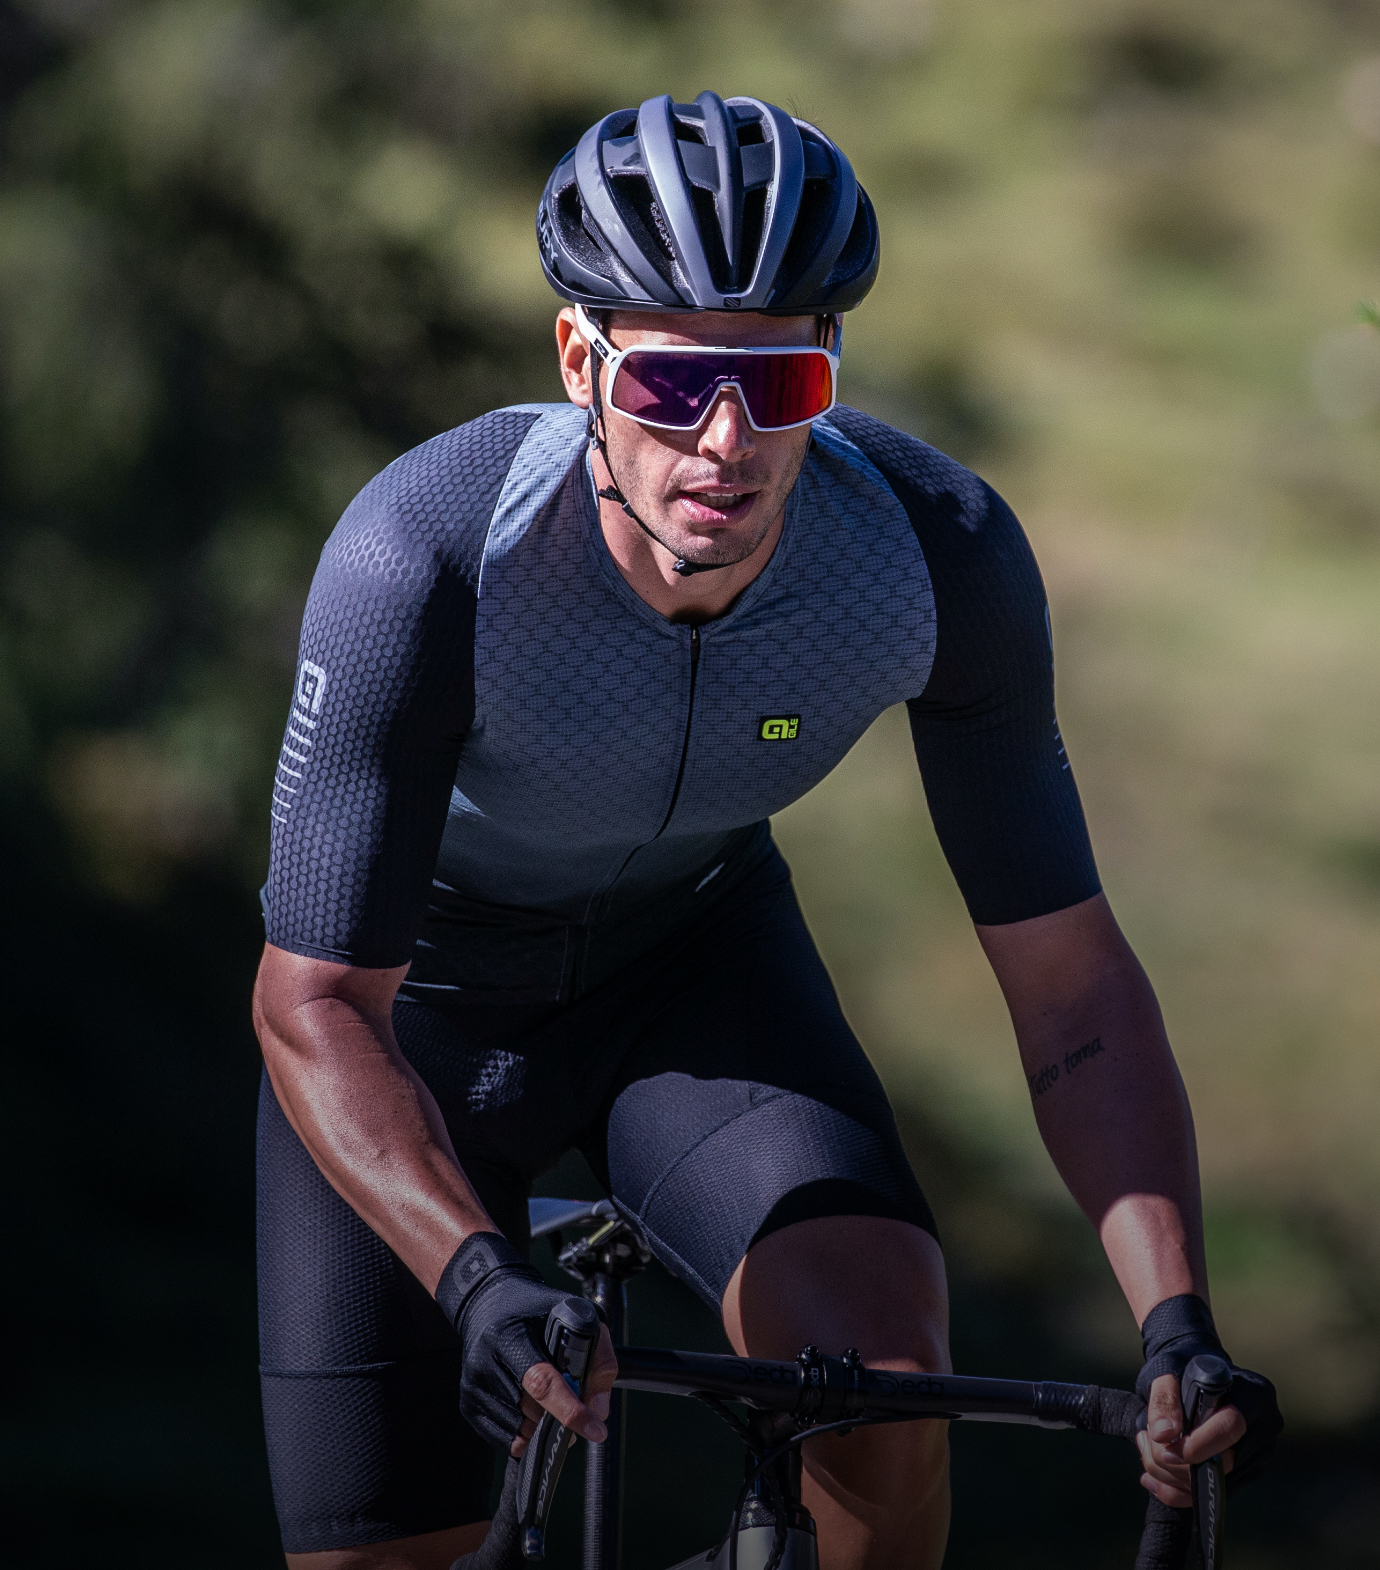 Discount Cycling Gear, Cycling Clothing Sales